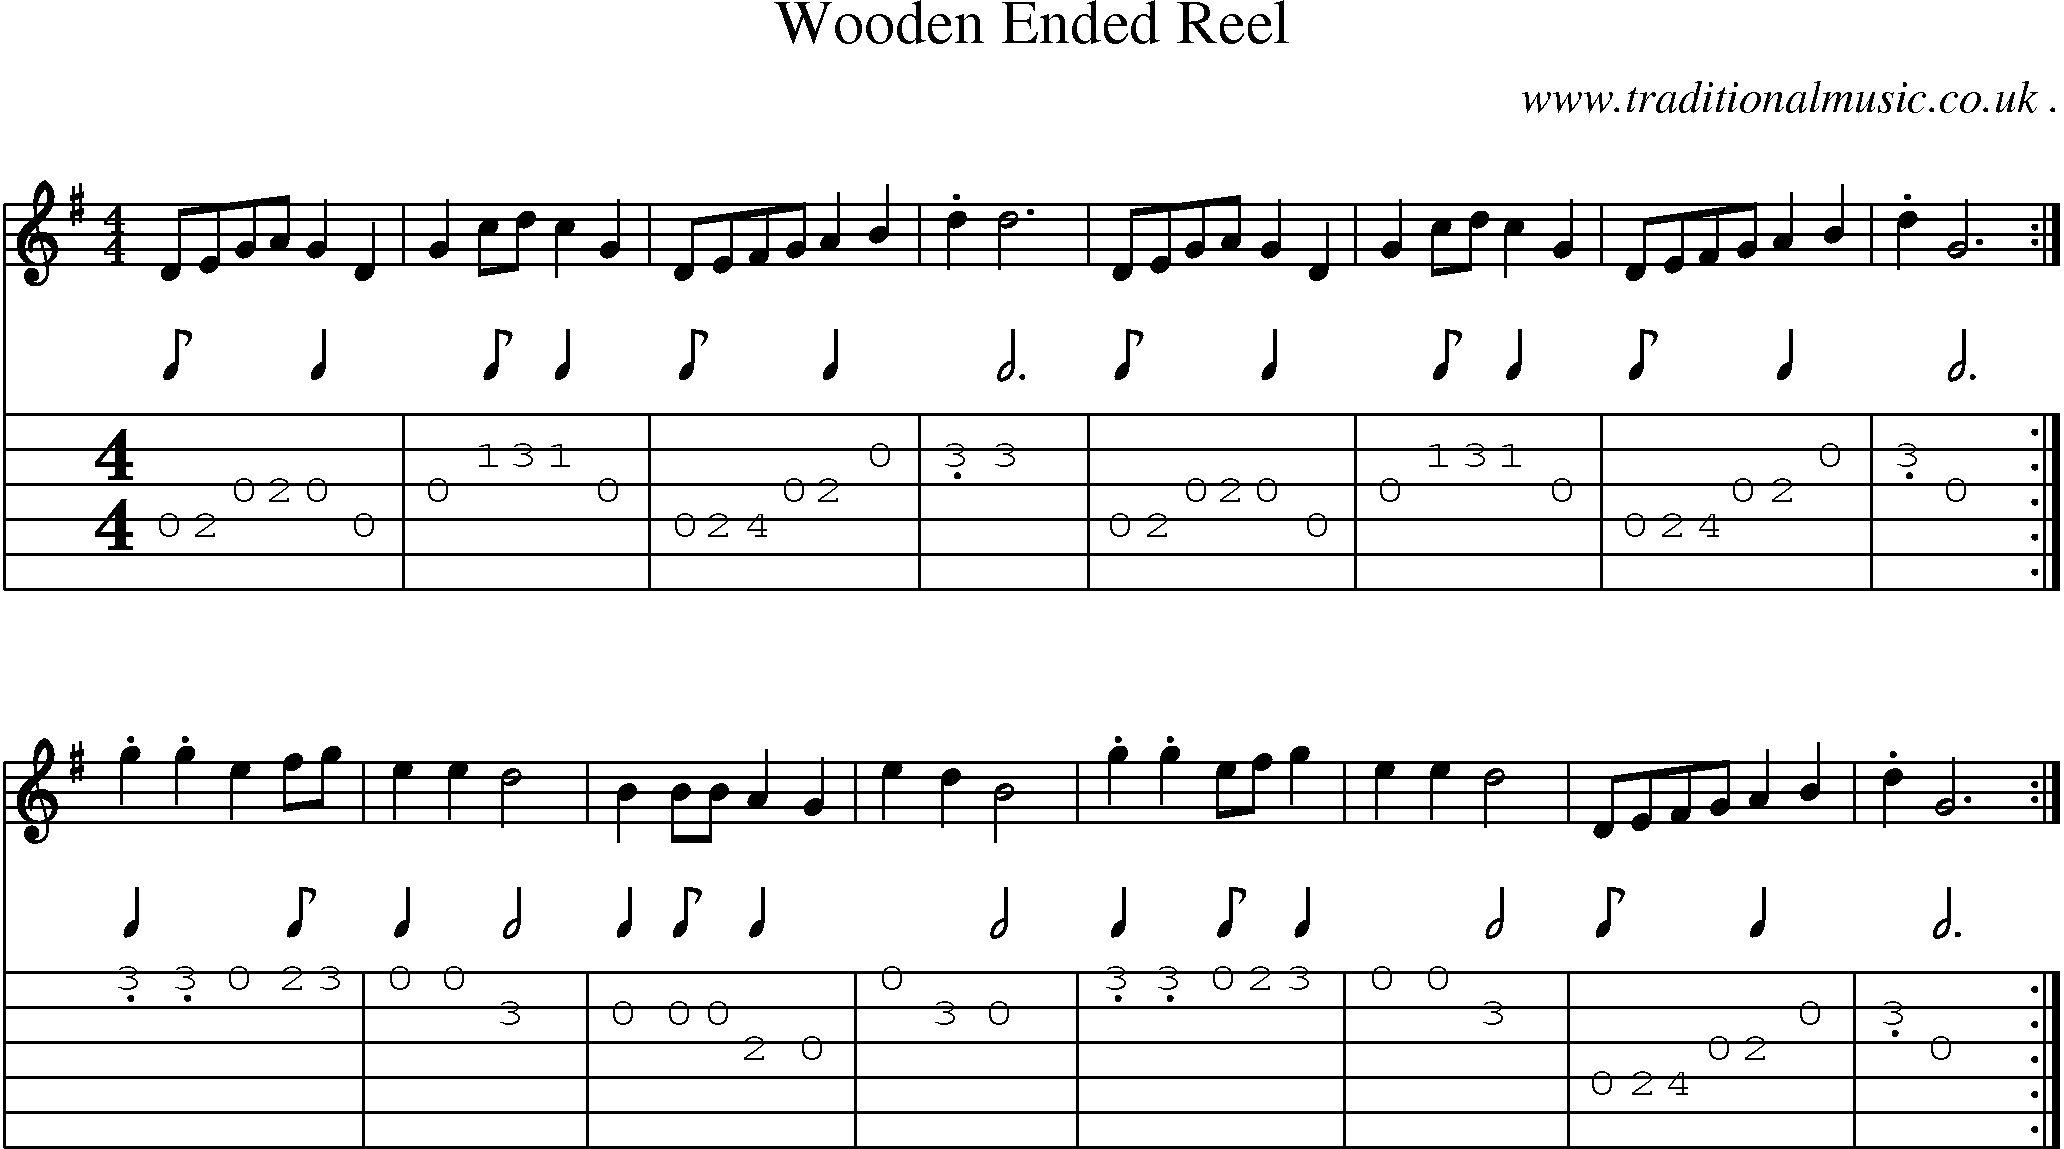 Music Score and Guitar Tabs for Wooden Ended Reel